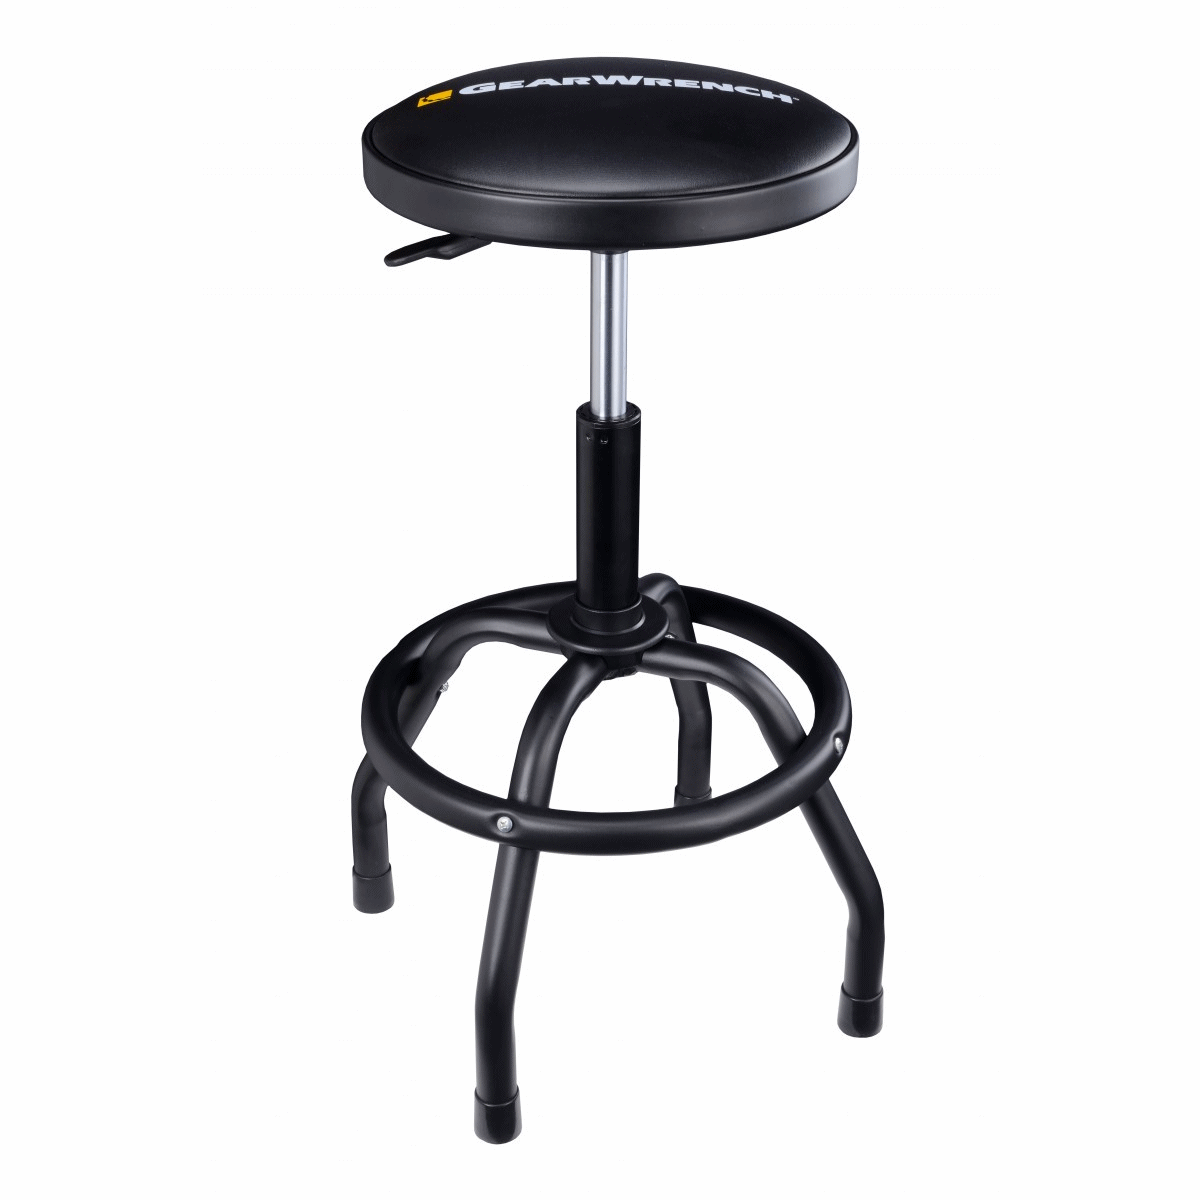 Gear Wrench Kdt-86992 Adjustable Height Swivel Shop Stool